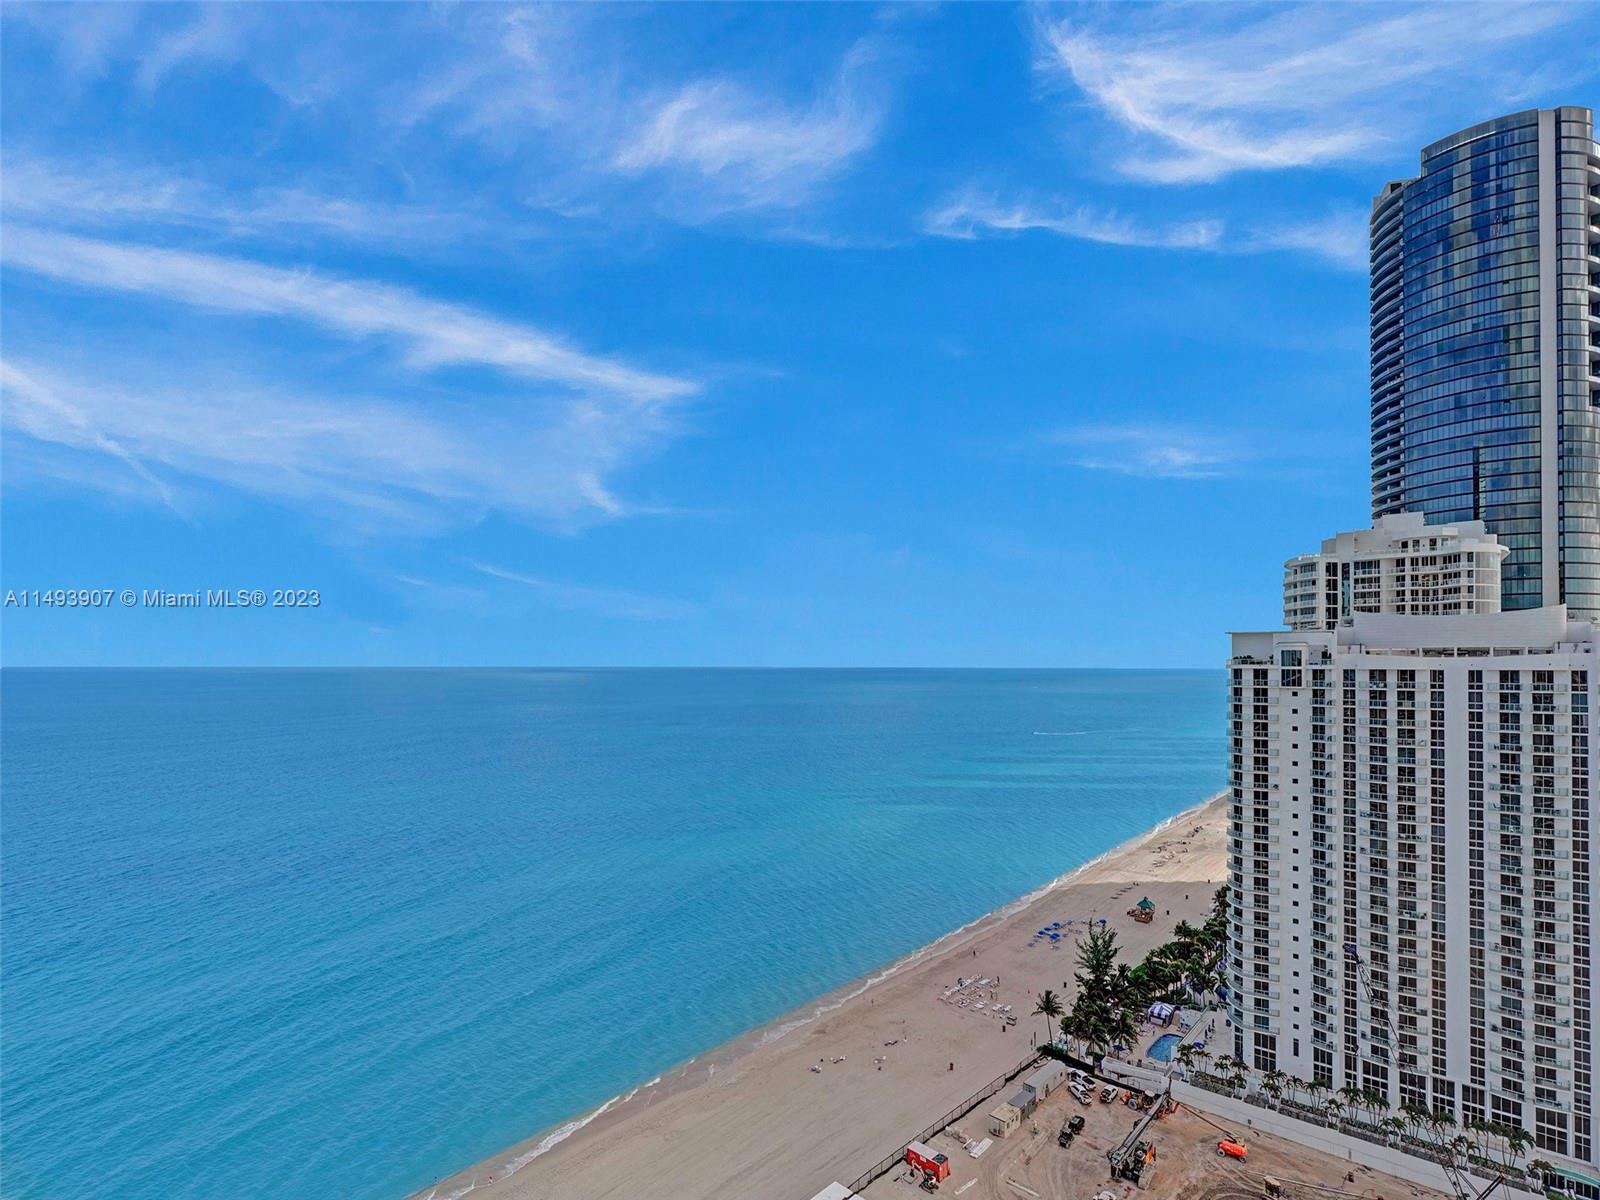 Highly updated 2 Bedrooms, 2 Baths condo in Sunny Isles Beach with spectacular ocean views and beach access.
Freshly painted, new lighting and shades. For showings please call listing agent.